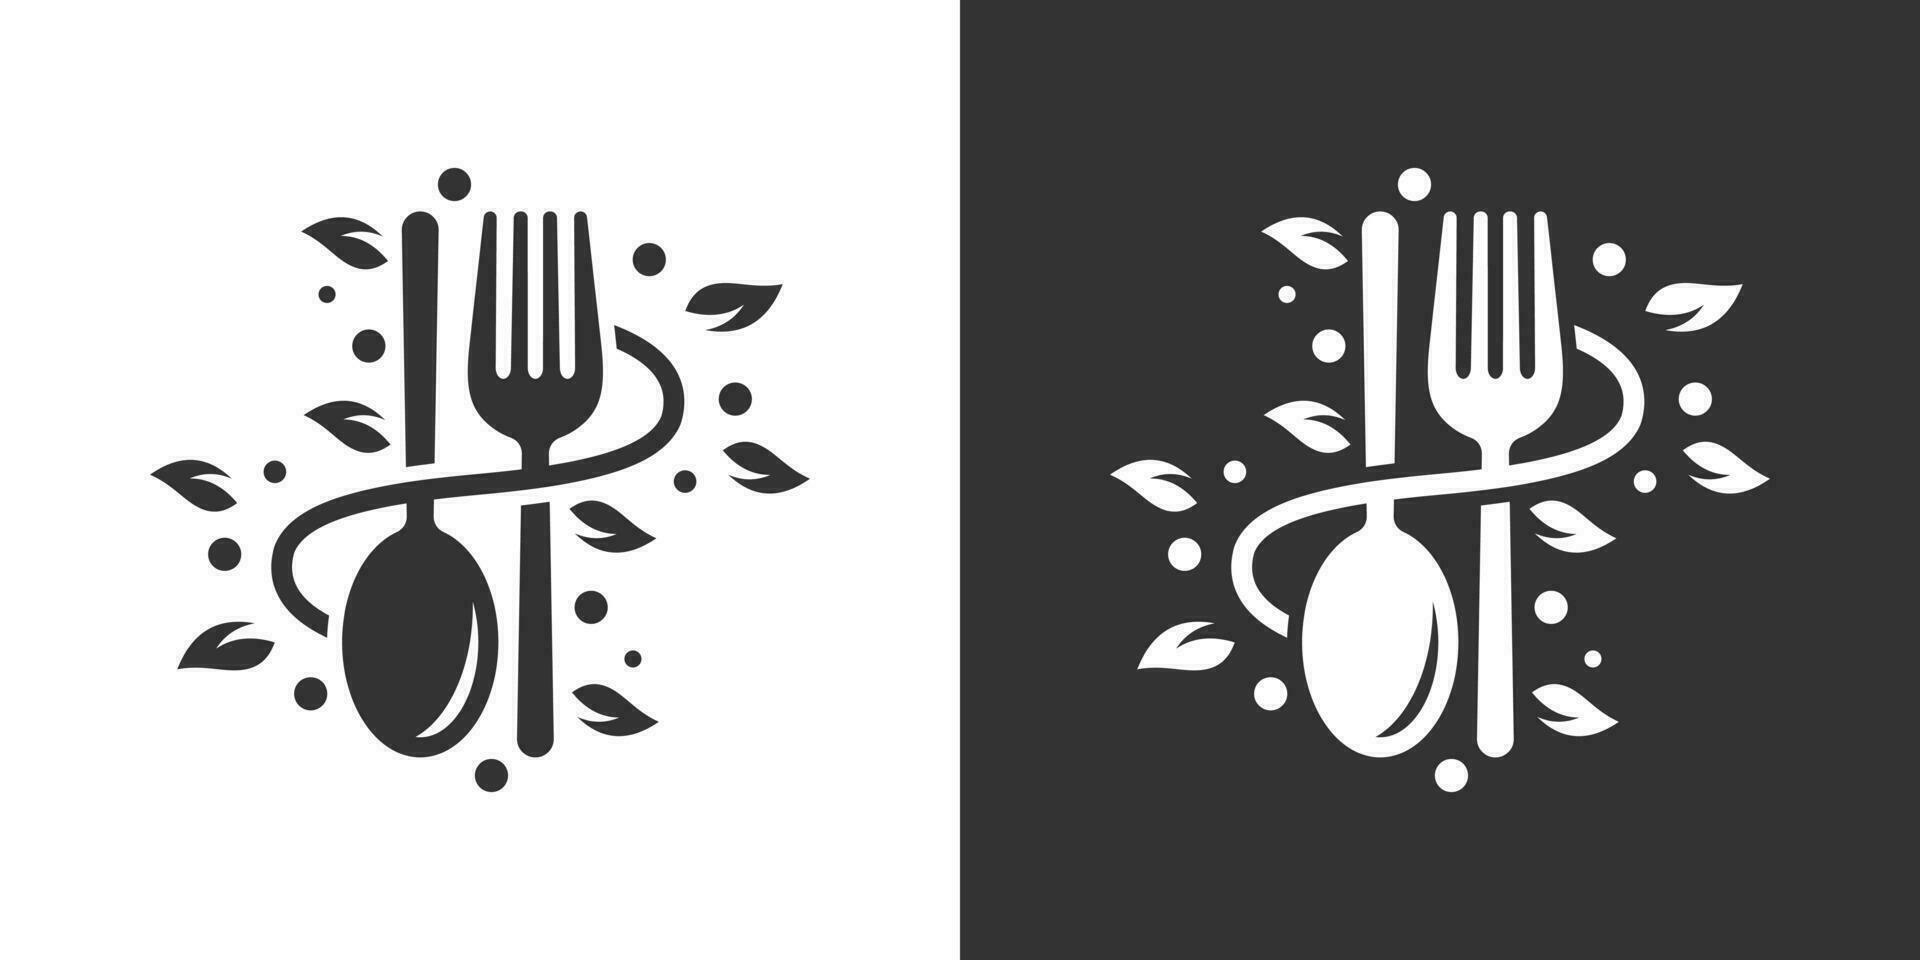 Healthy food diet logo design with spoon, fork, and leaf design graphic vector illustration. Symbol, icon, creative.